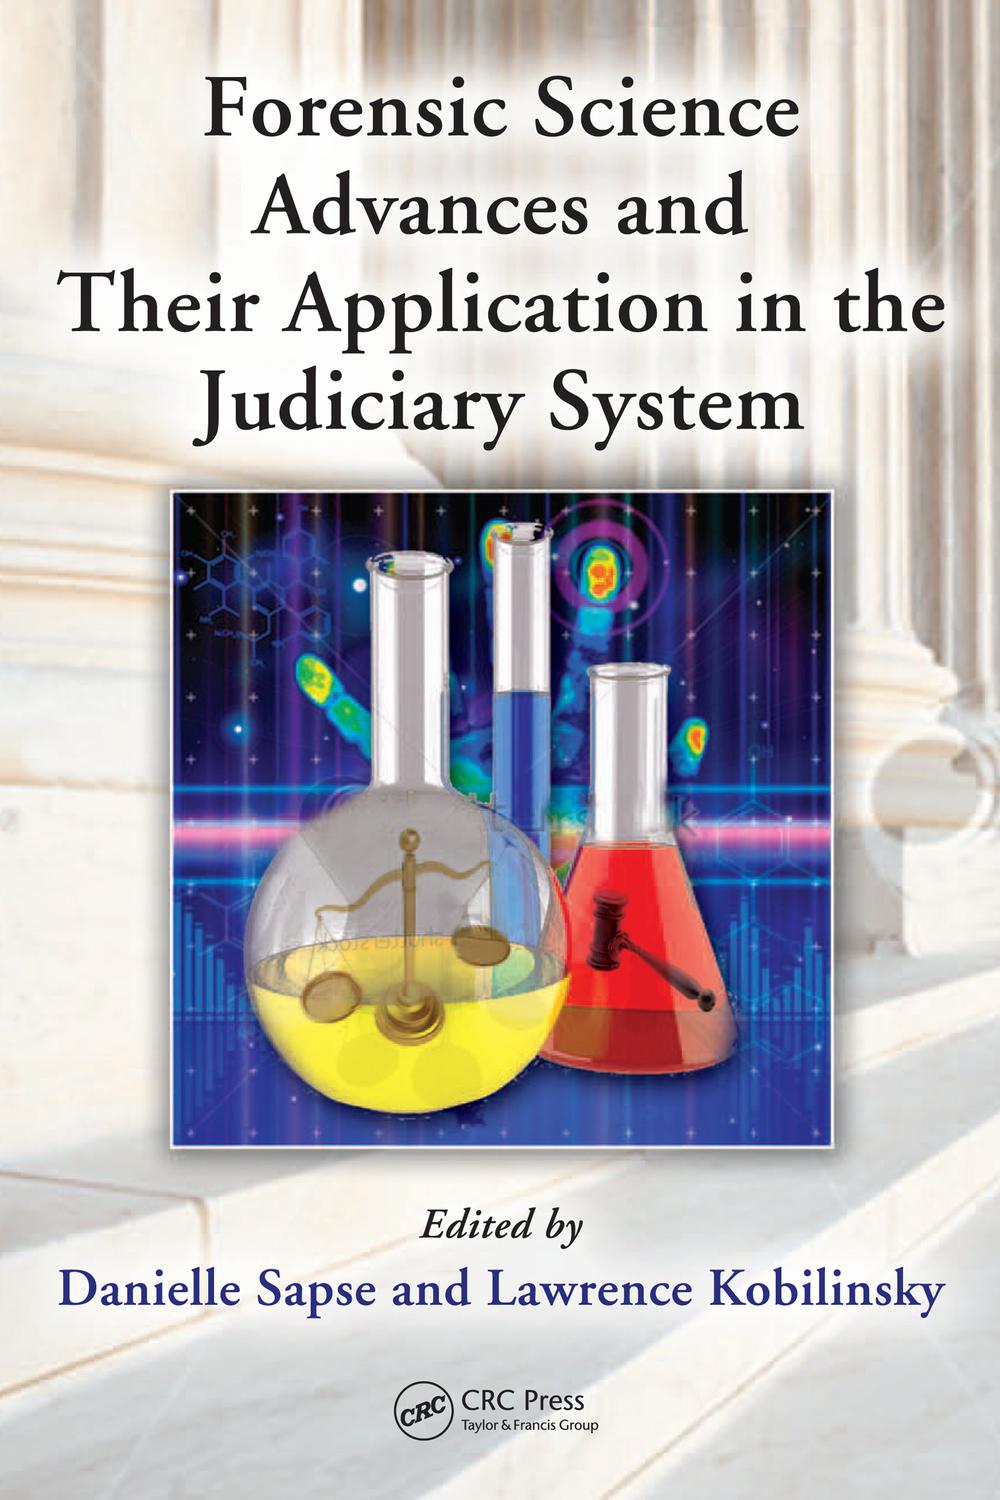 Forensic Science Advances and Their Application in the Judiciary System - Danielle Sapse, Lawrence Kobilinsky